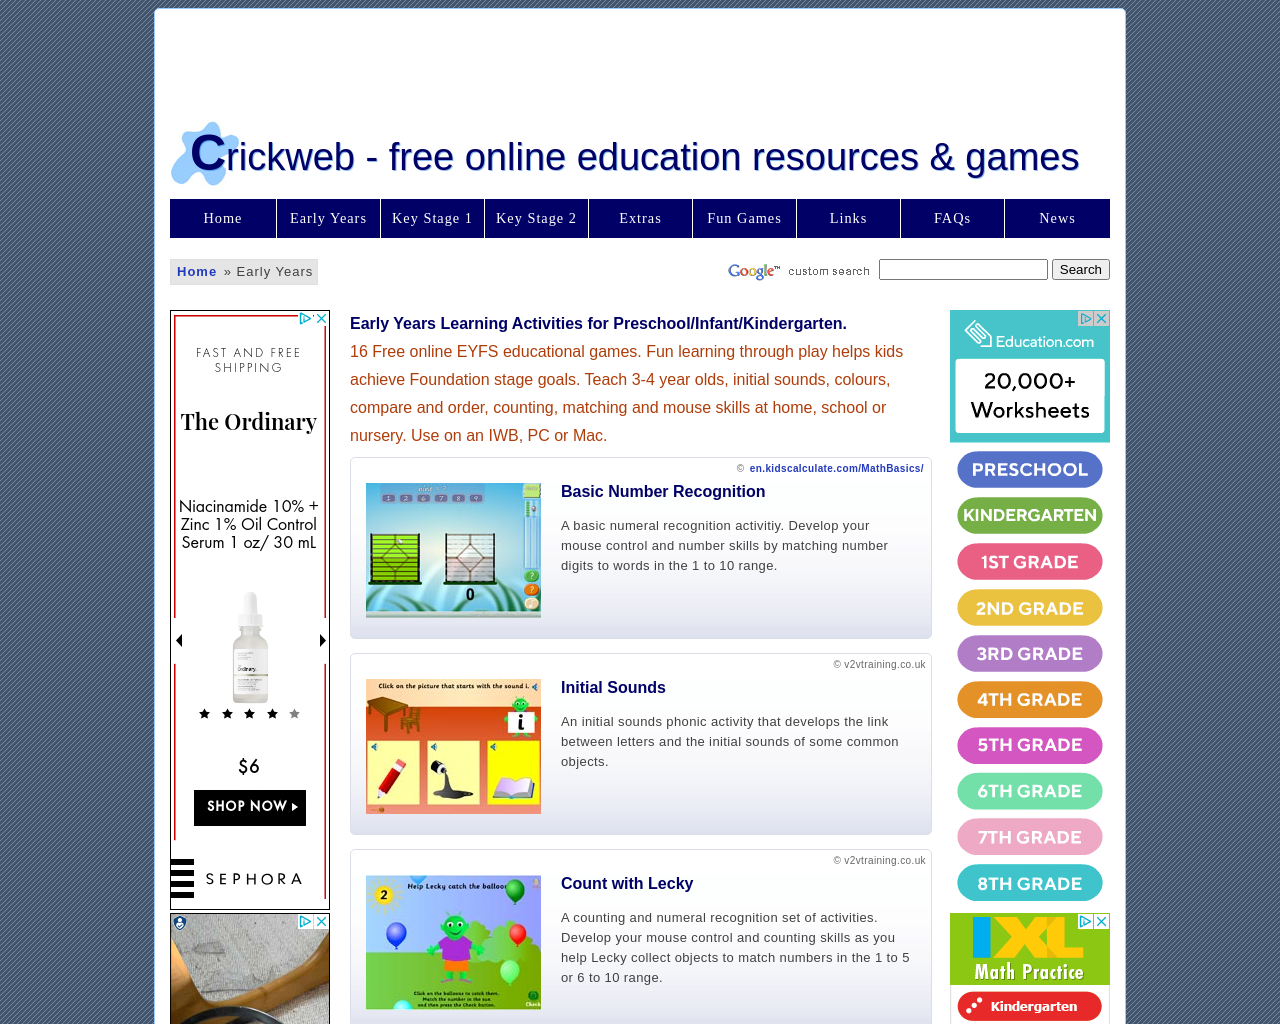 Try these Crickweb Games